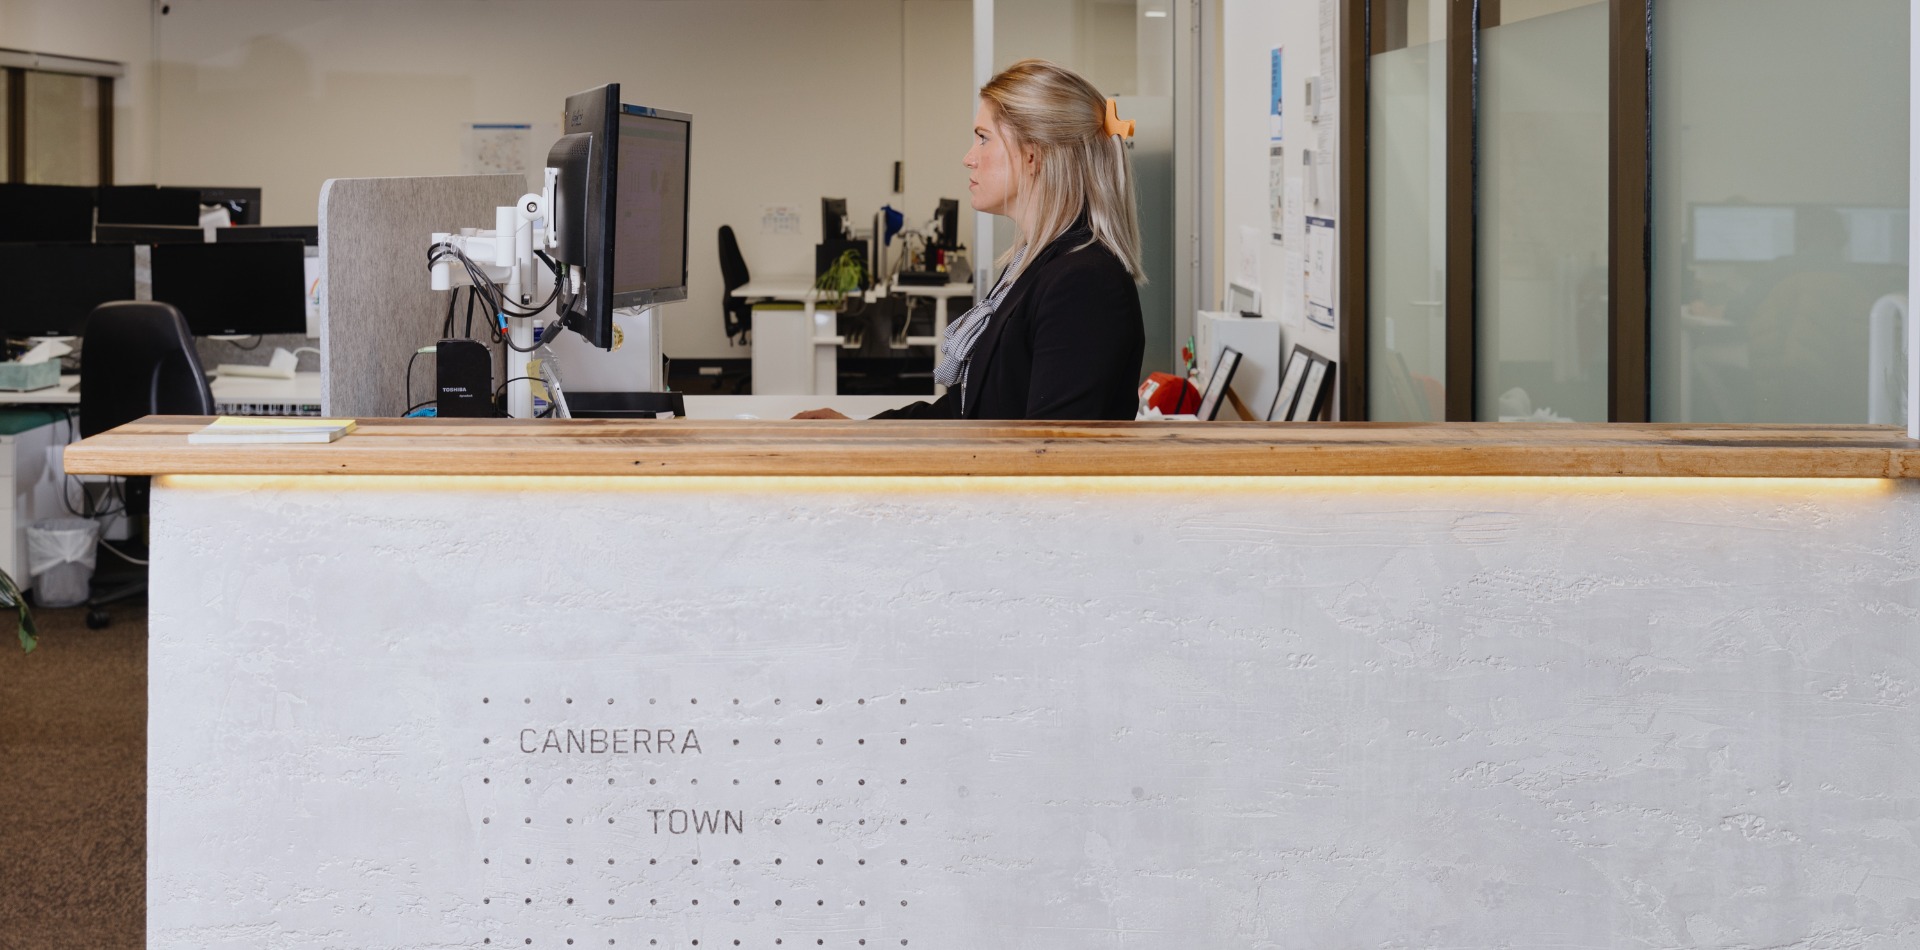 Contact Canberra Town Planning